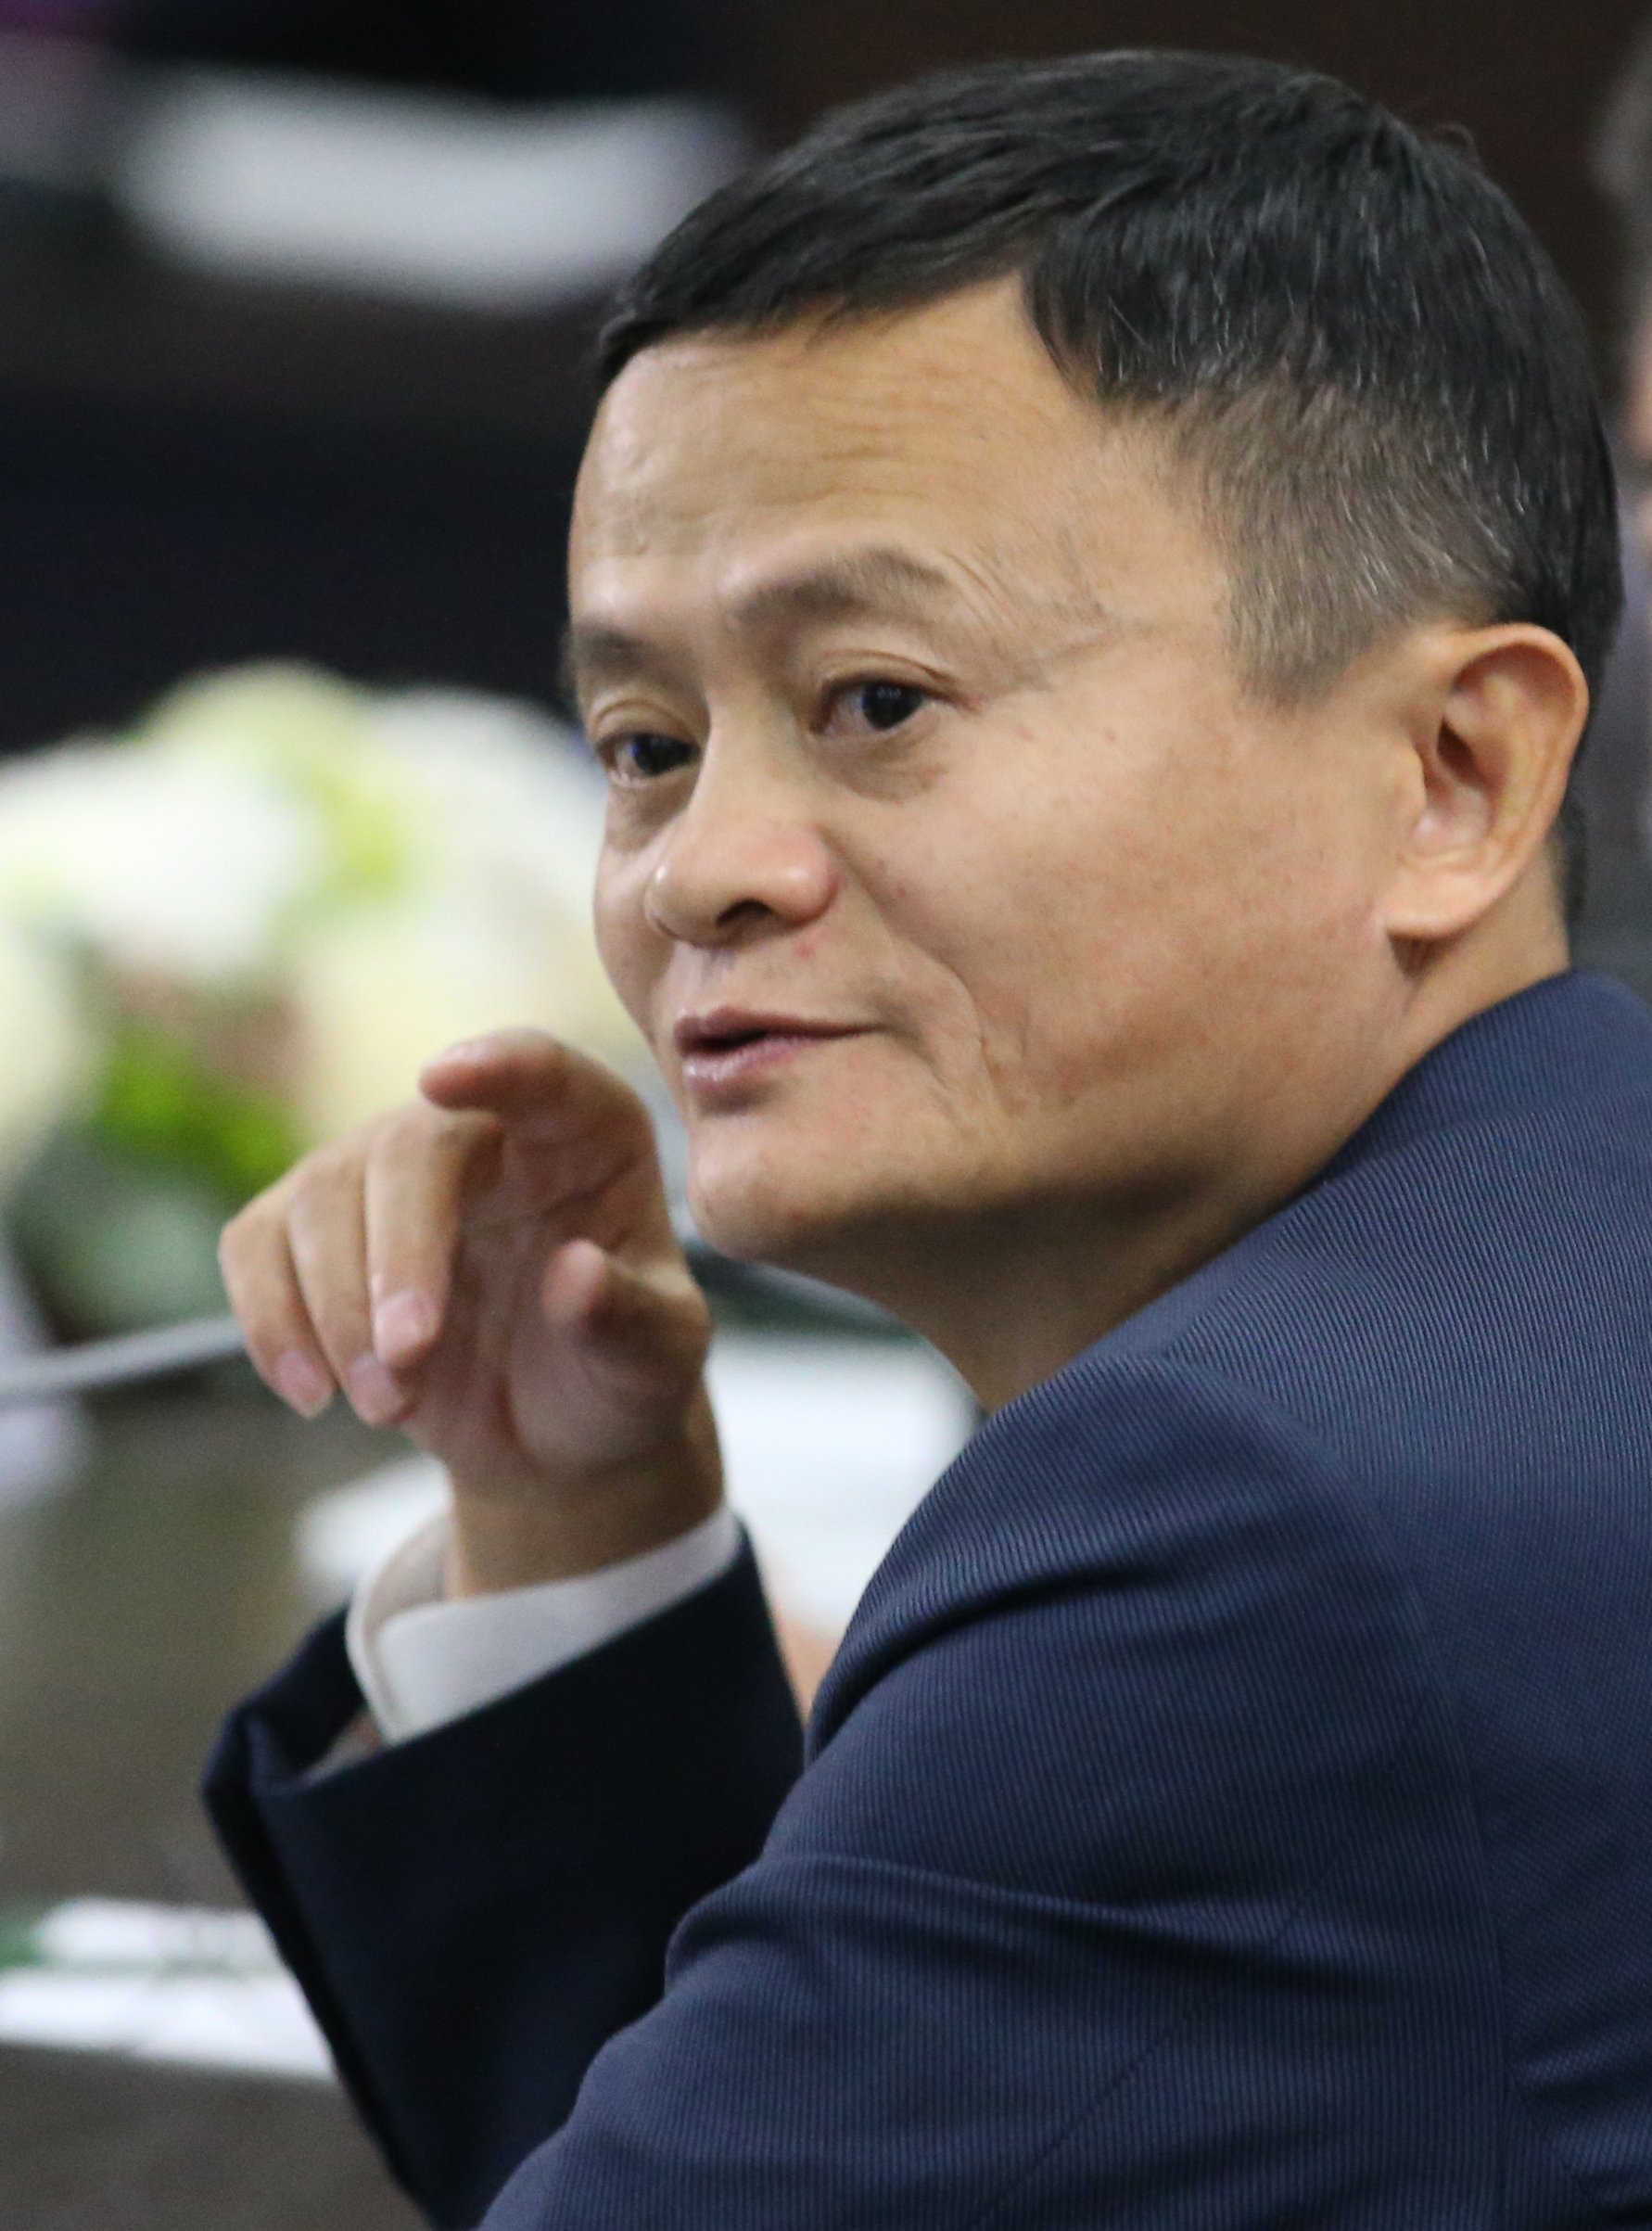 Alibaba's Chairman Jack Ma attending the Russian-Chinese meeting at the Eastern Economic Forum in Vadivostok, Russia | Photo: Getty Images